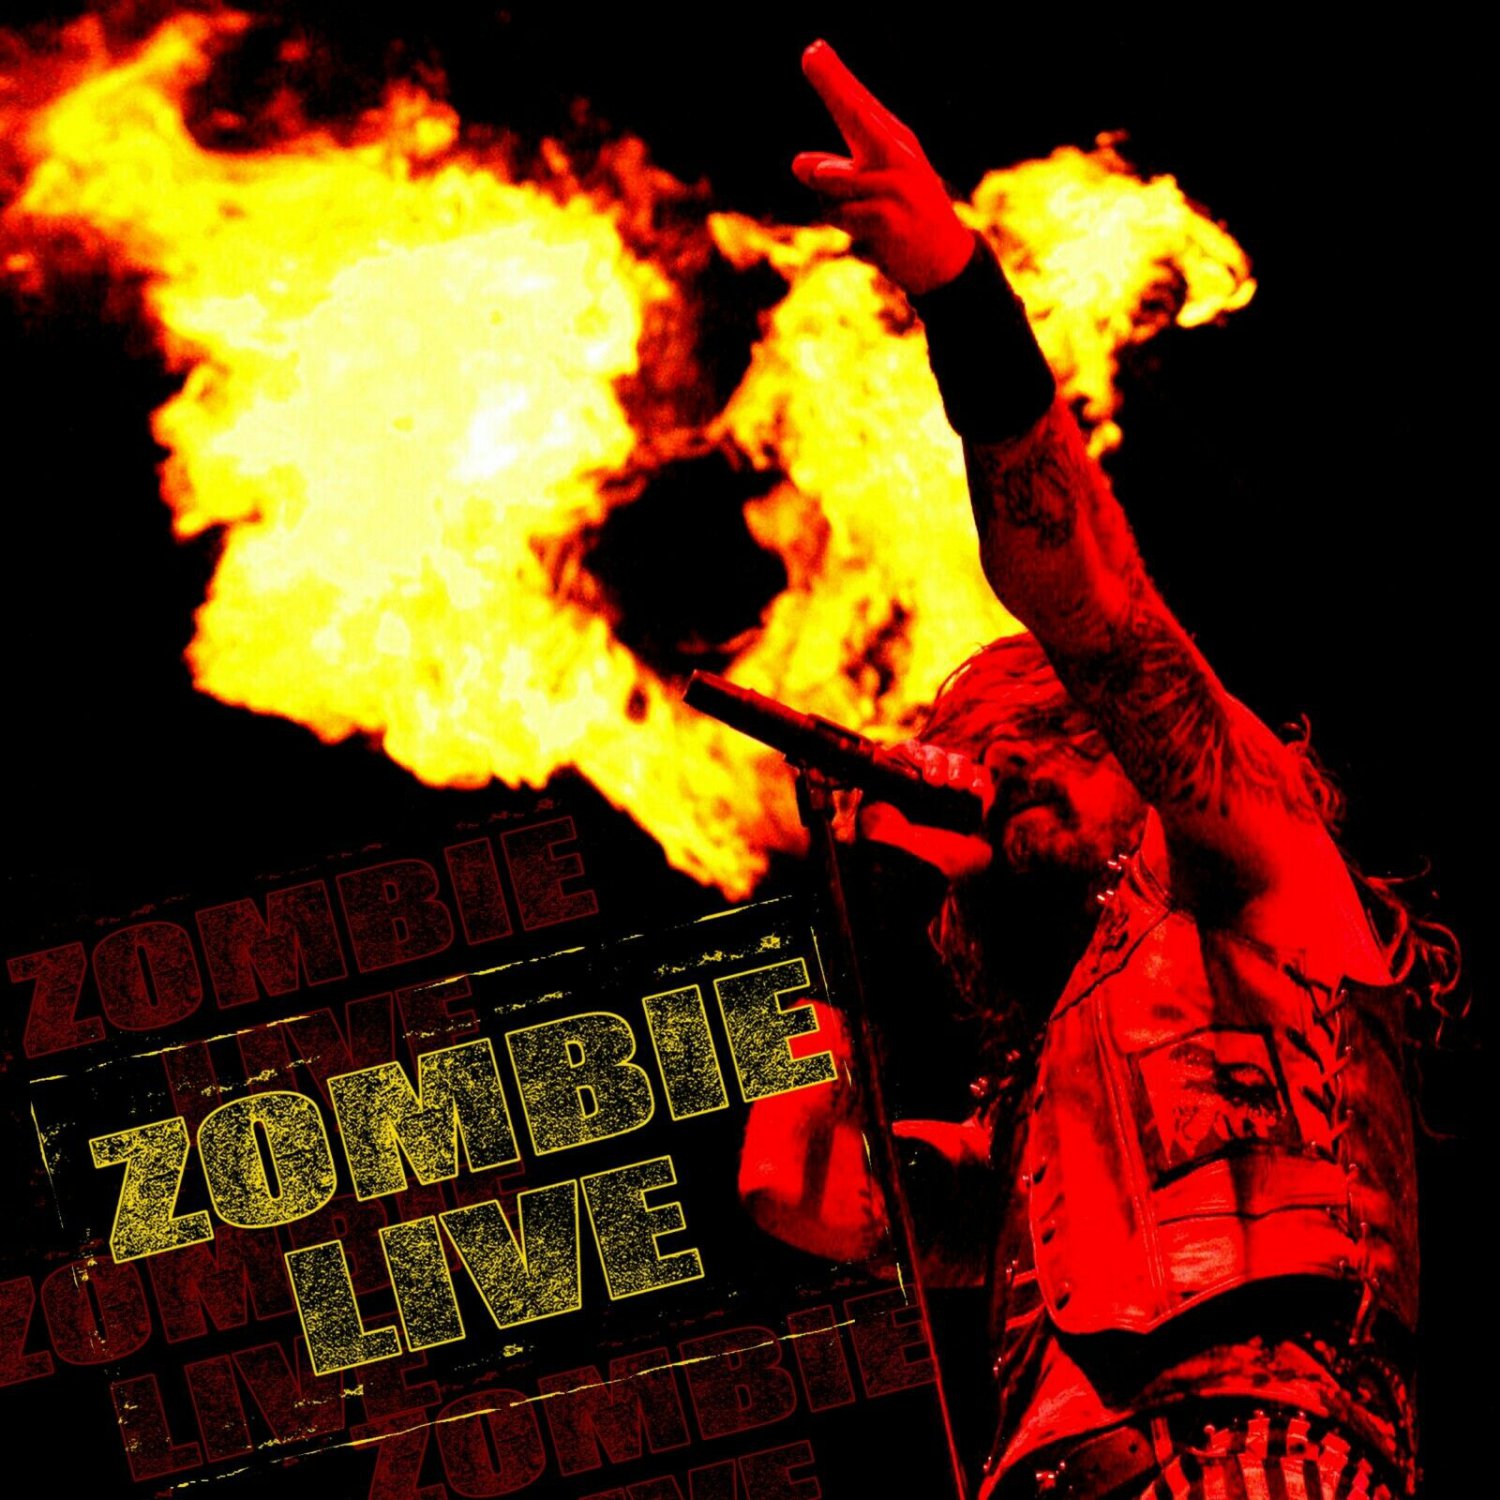 ROB ZOMBIE Zombie Live BANNER Huge 4X4 Ft Fabric Poster Tapestry Flag Print album cover art